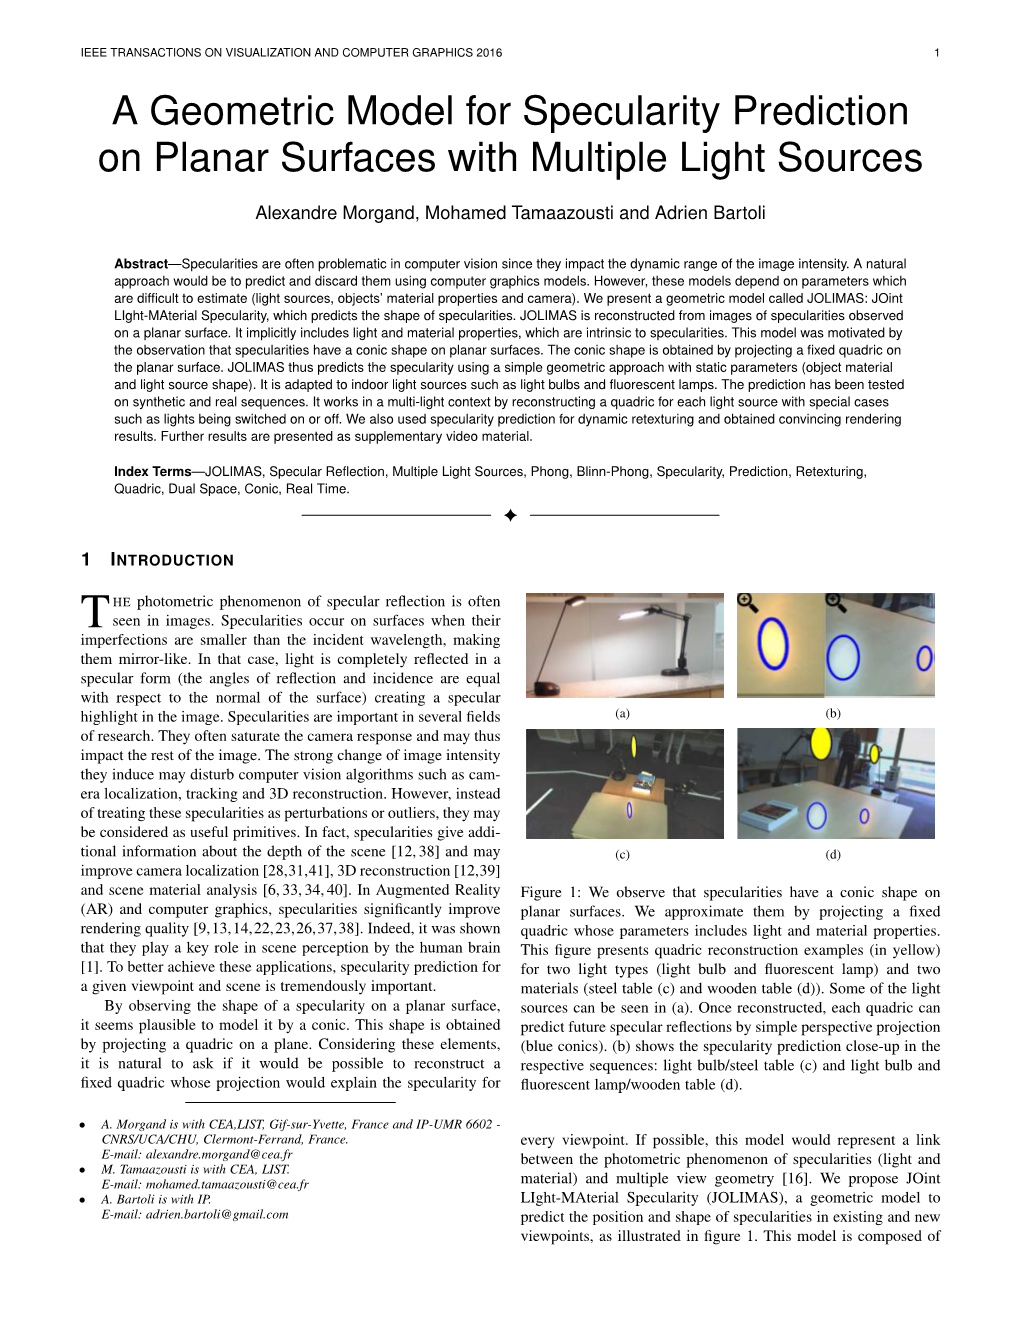 A Geometric Model for Specularity Prediction on Planar Surfaces with Multiple Light Sources